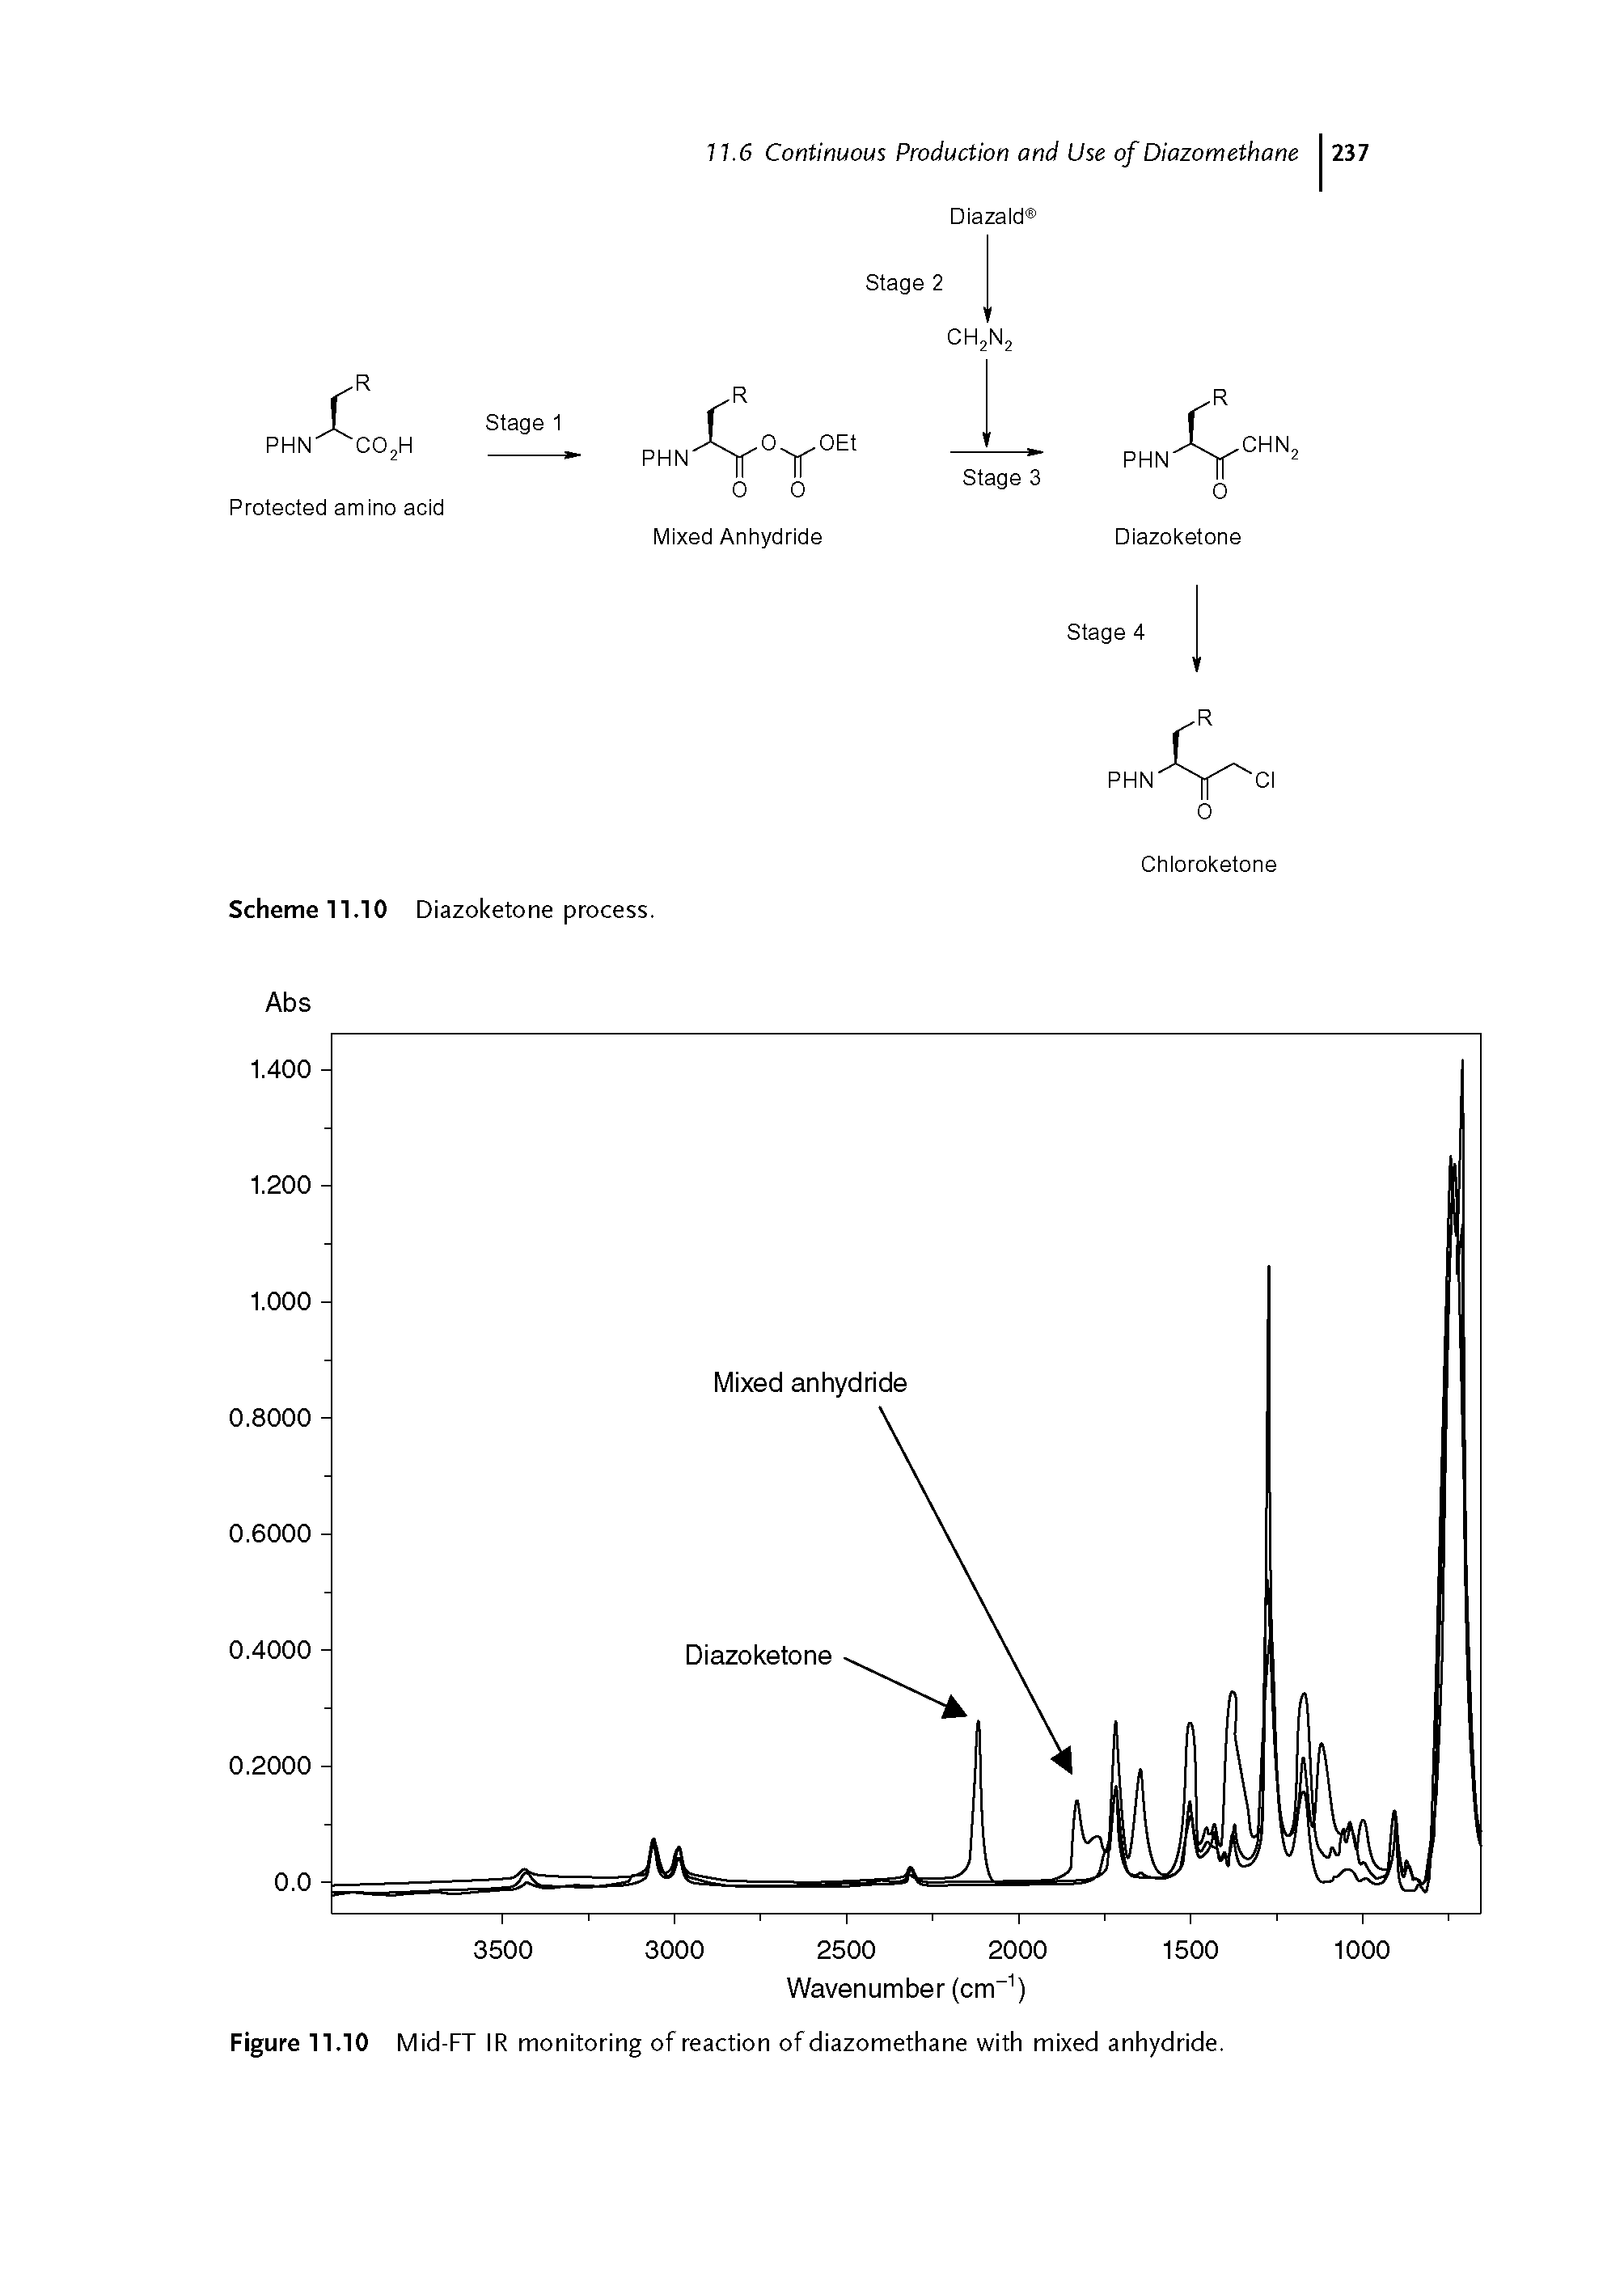 Figure 11.10 Mid-FT IR monitoring of reaction of diazomethane with mixed anhydride.